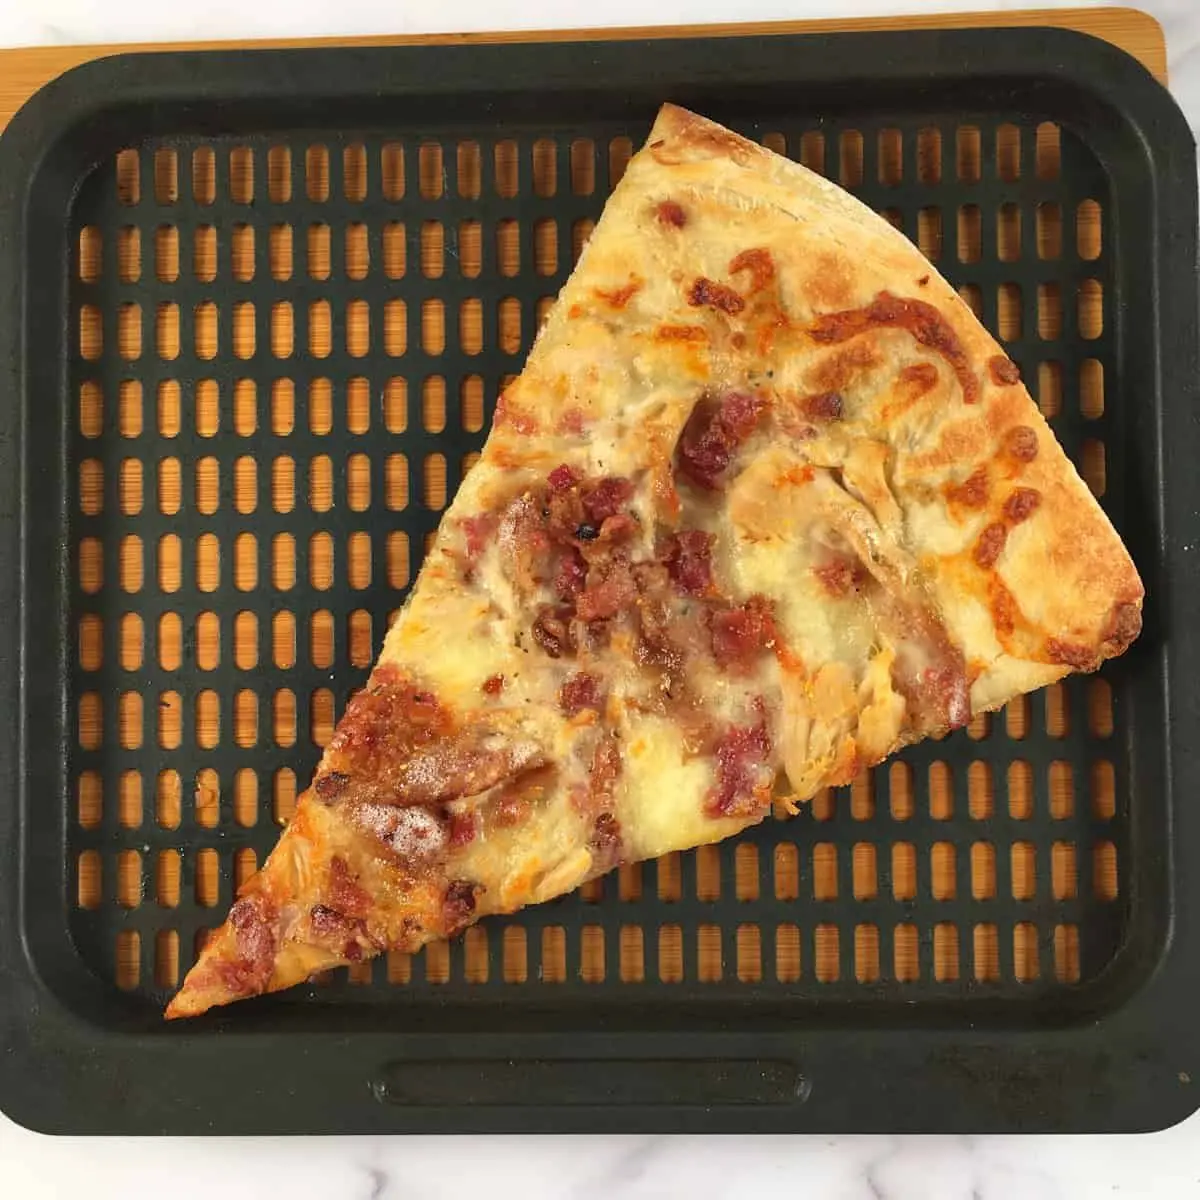 How to Reheat Pizza in an Air Fryer